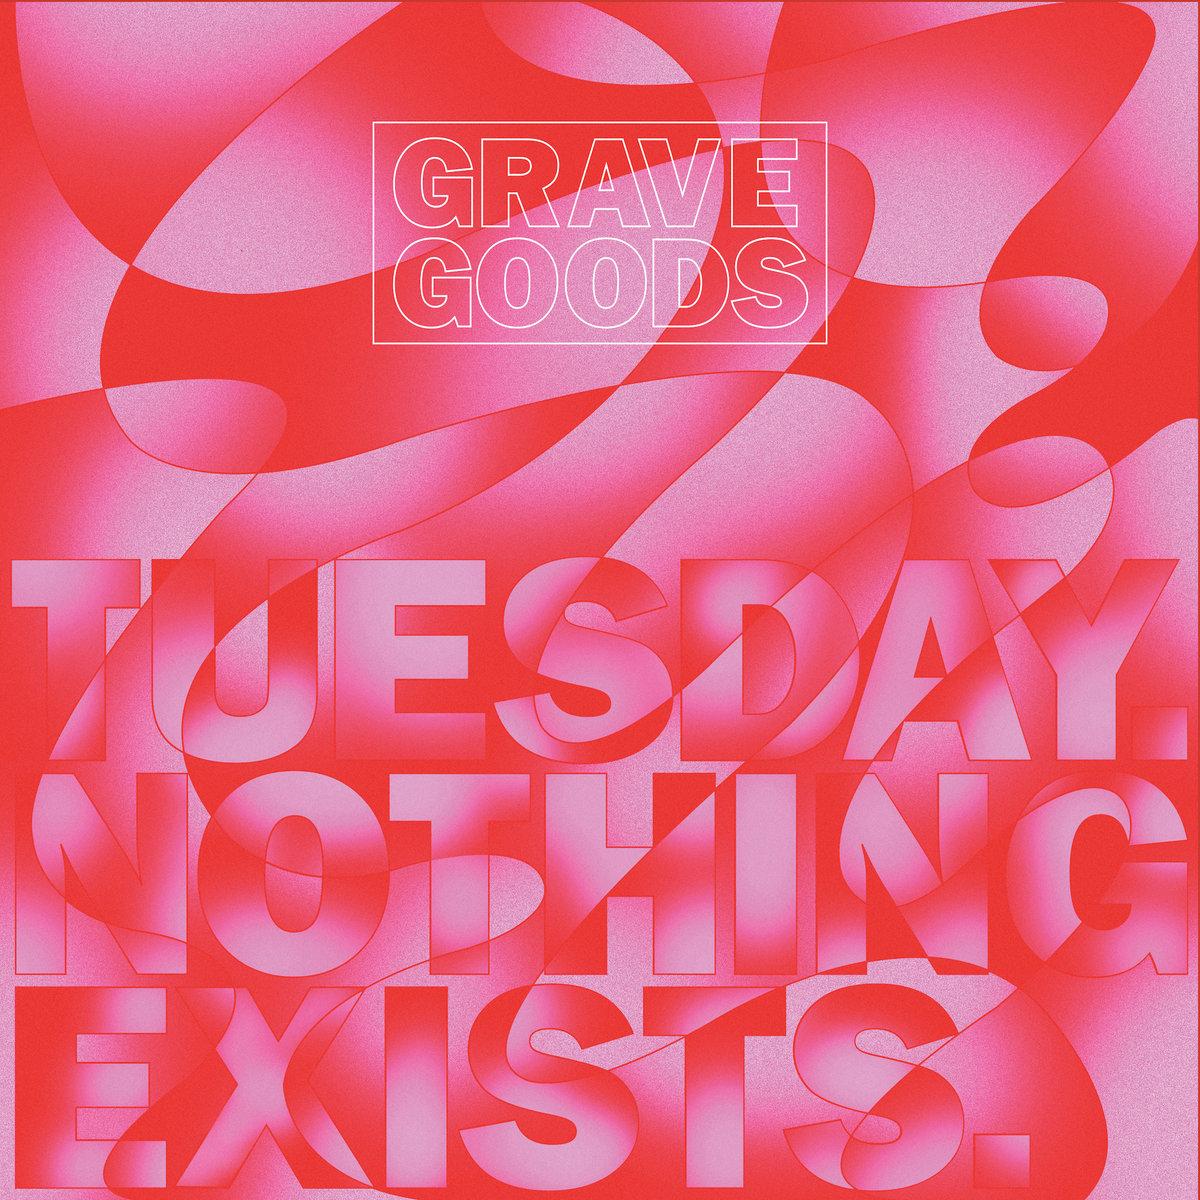 News – GRAVE GOODS – TUESDAY. NOTHING EXISTS